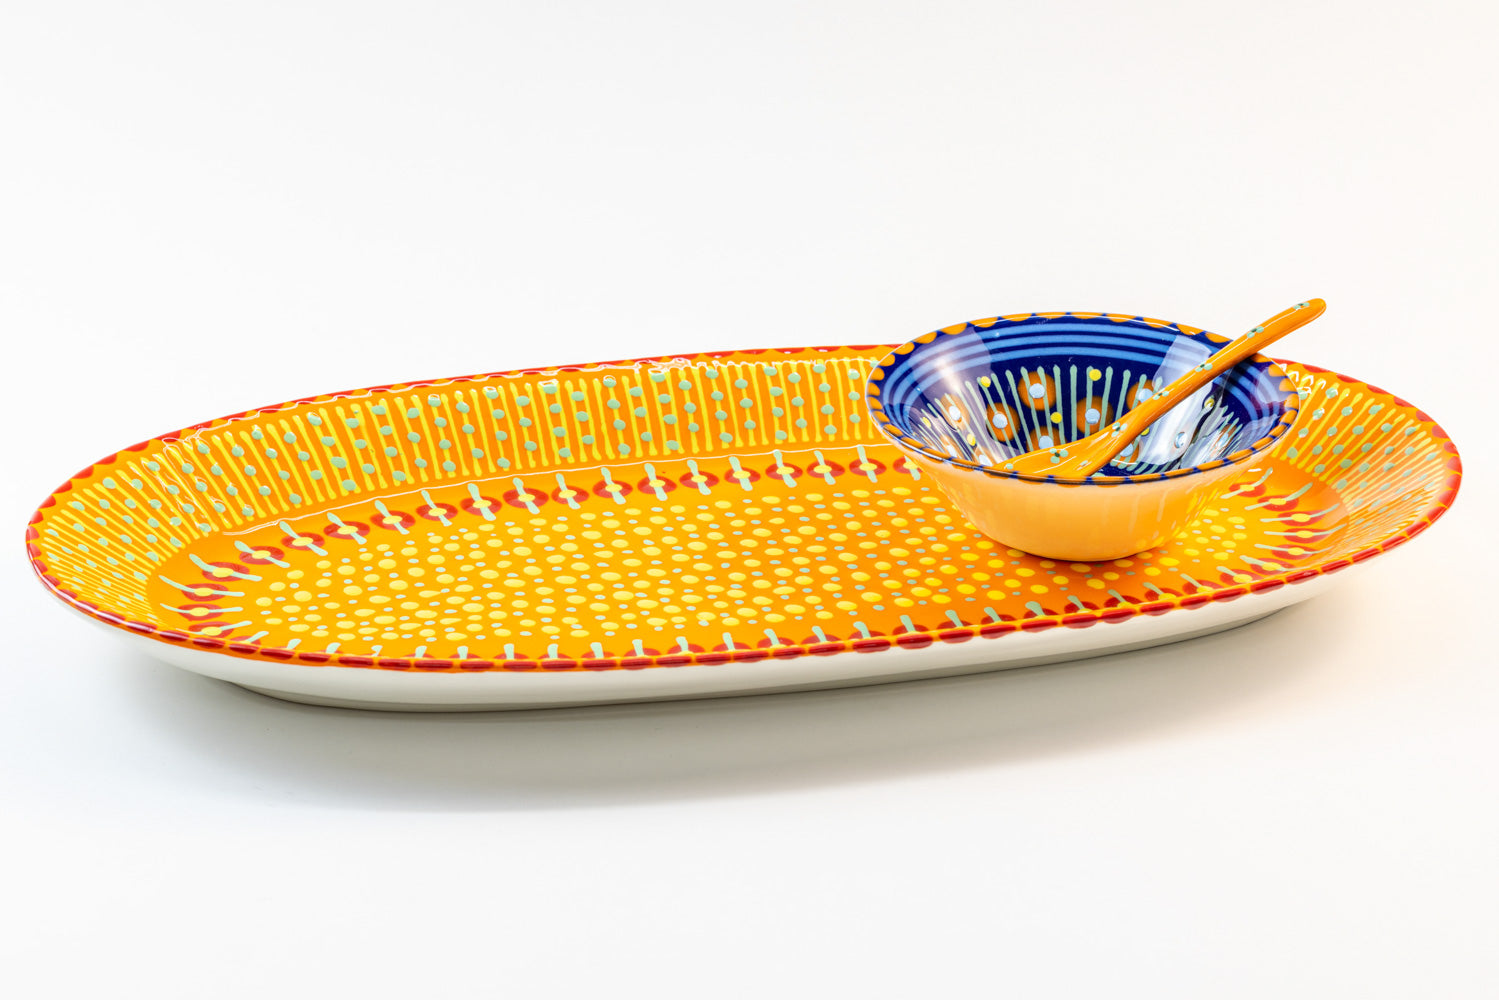 Ceramic serving platter in Orange with Indigo Blue mini nut bowl & Orange small spoon sitting on the platter. Perfect size for condiments and beautiful color contrasts.